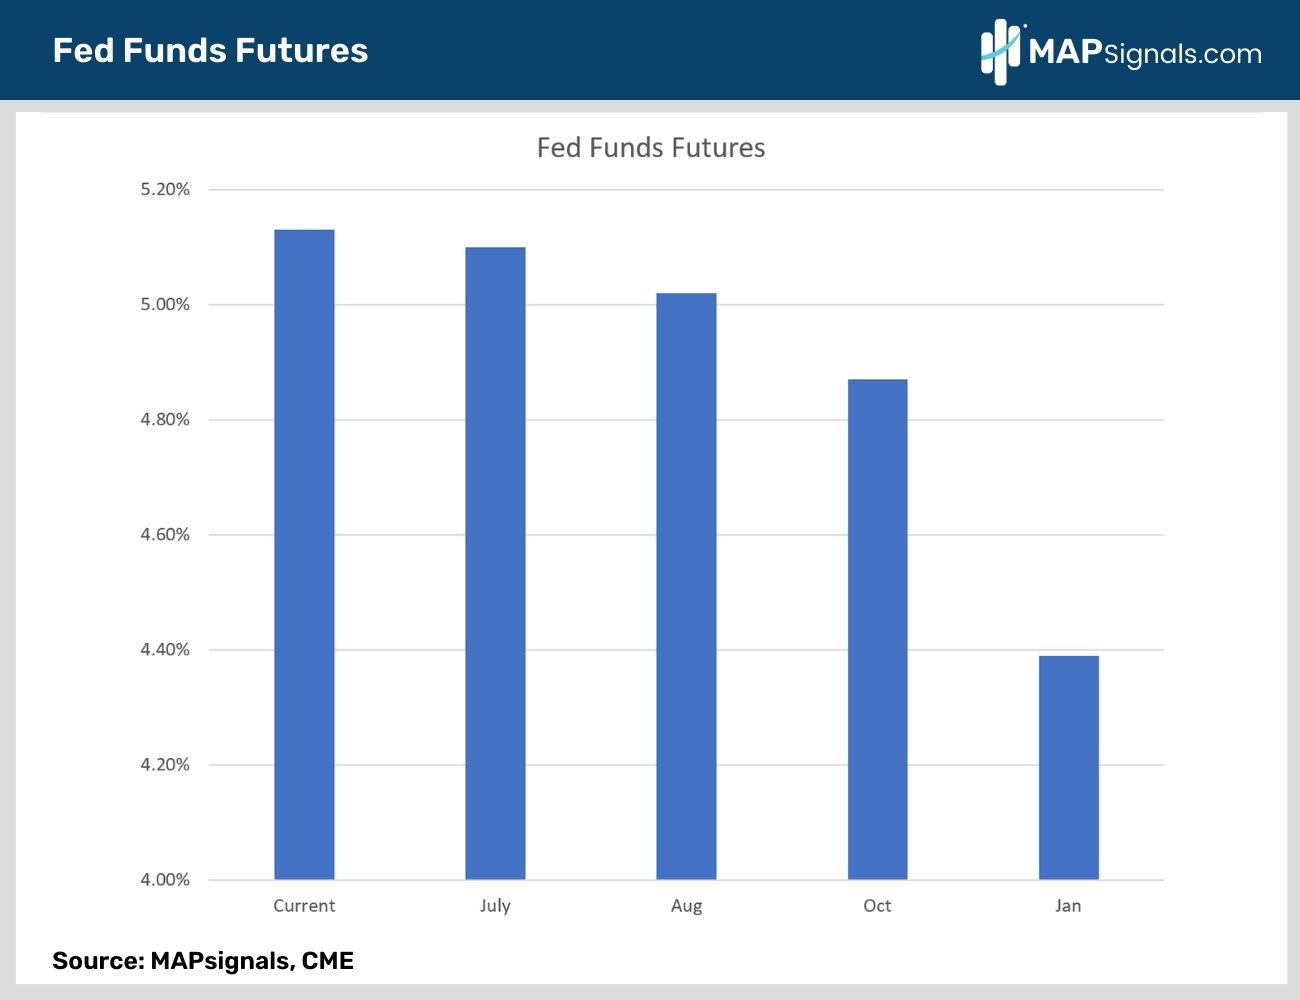 Fed Funds Futures | MAPsignals